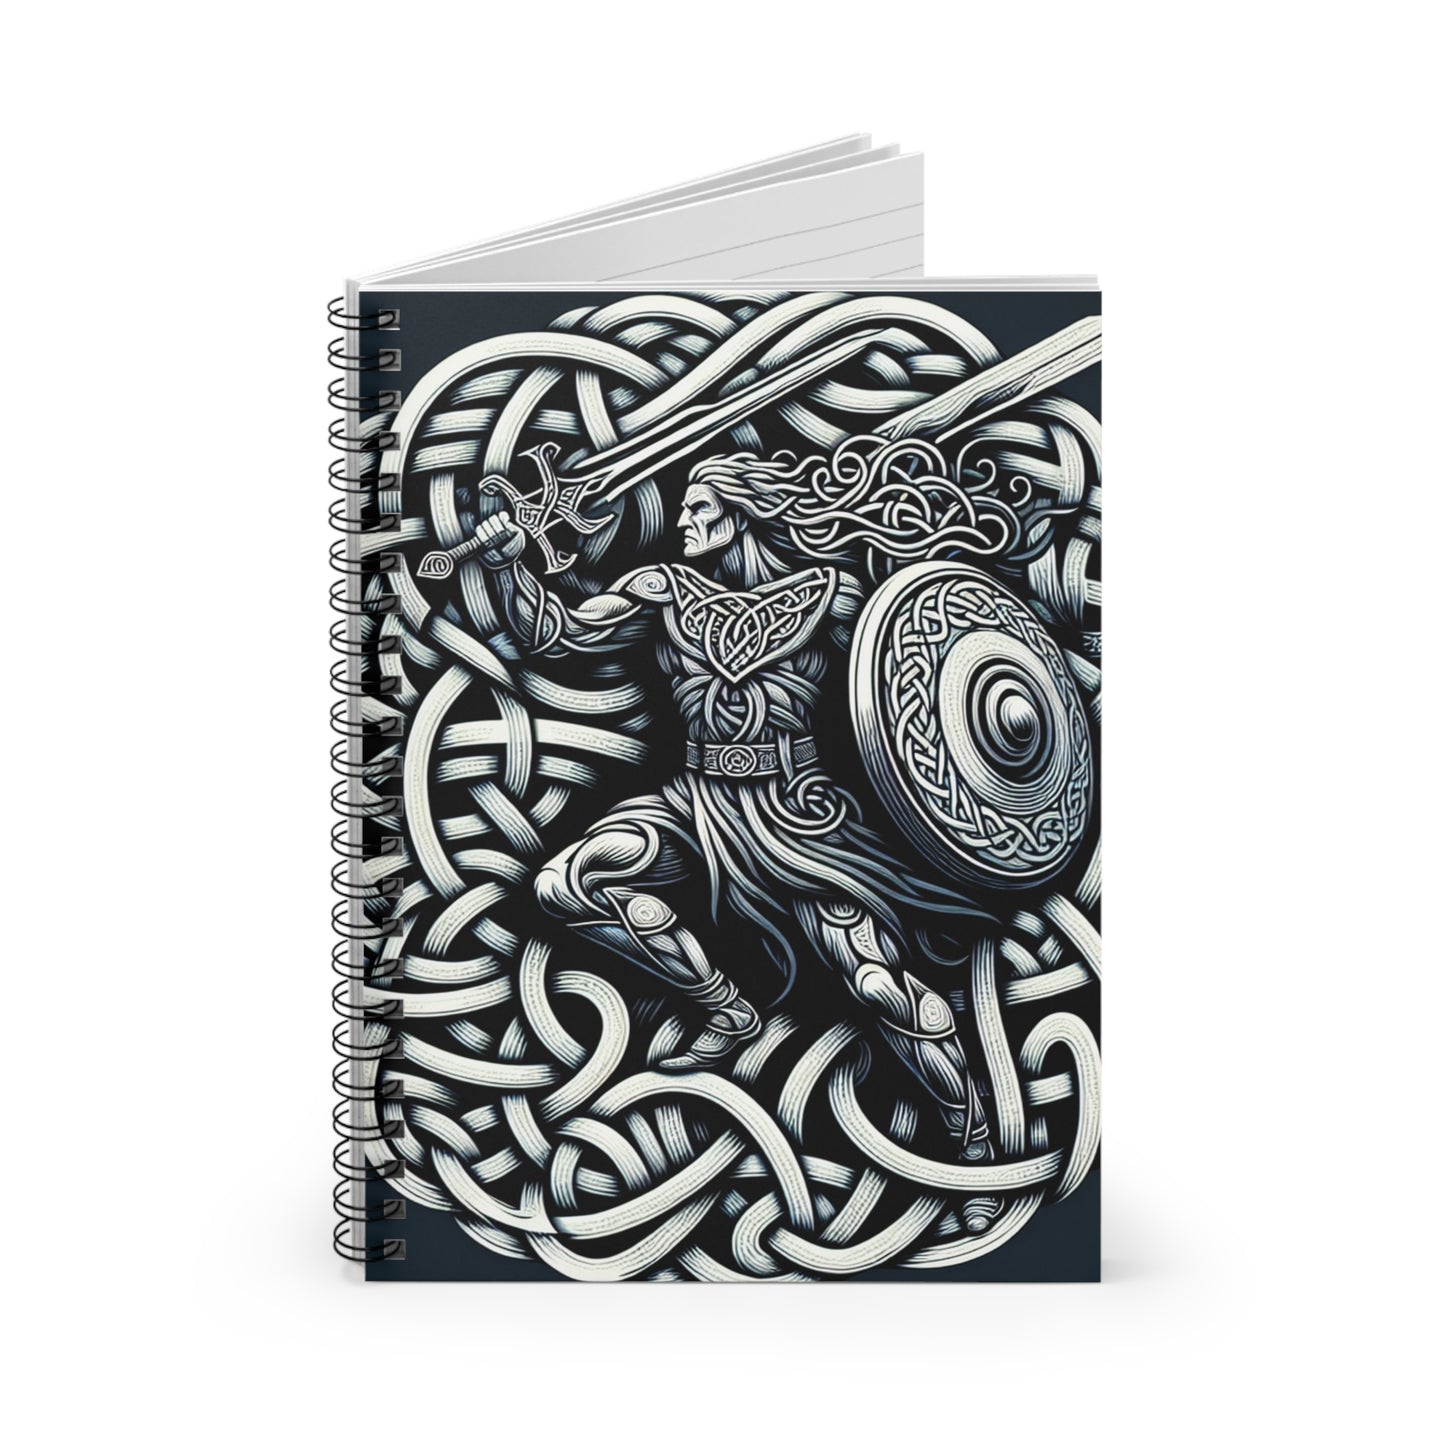 "Celtic Knight: Sword & Shield in Ancient Knots" - The Alien Spiral Notebook (Ruled Line) Celtic Art Style